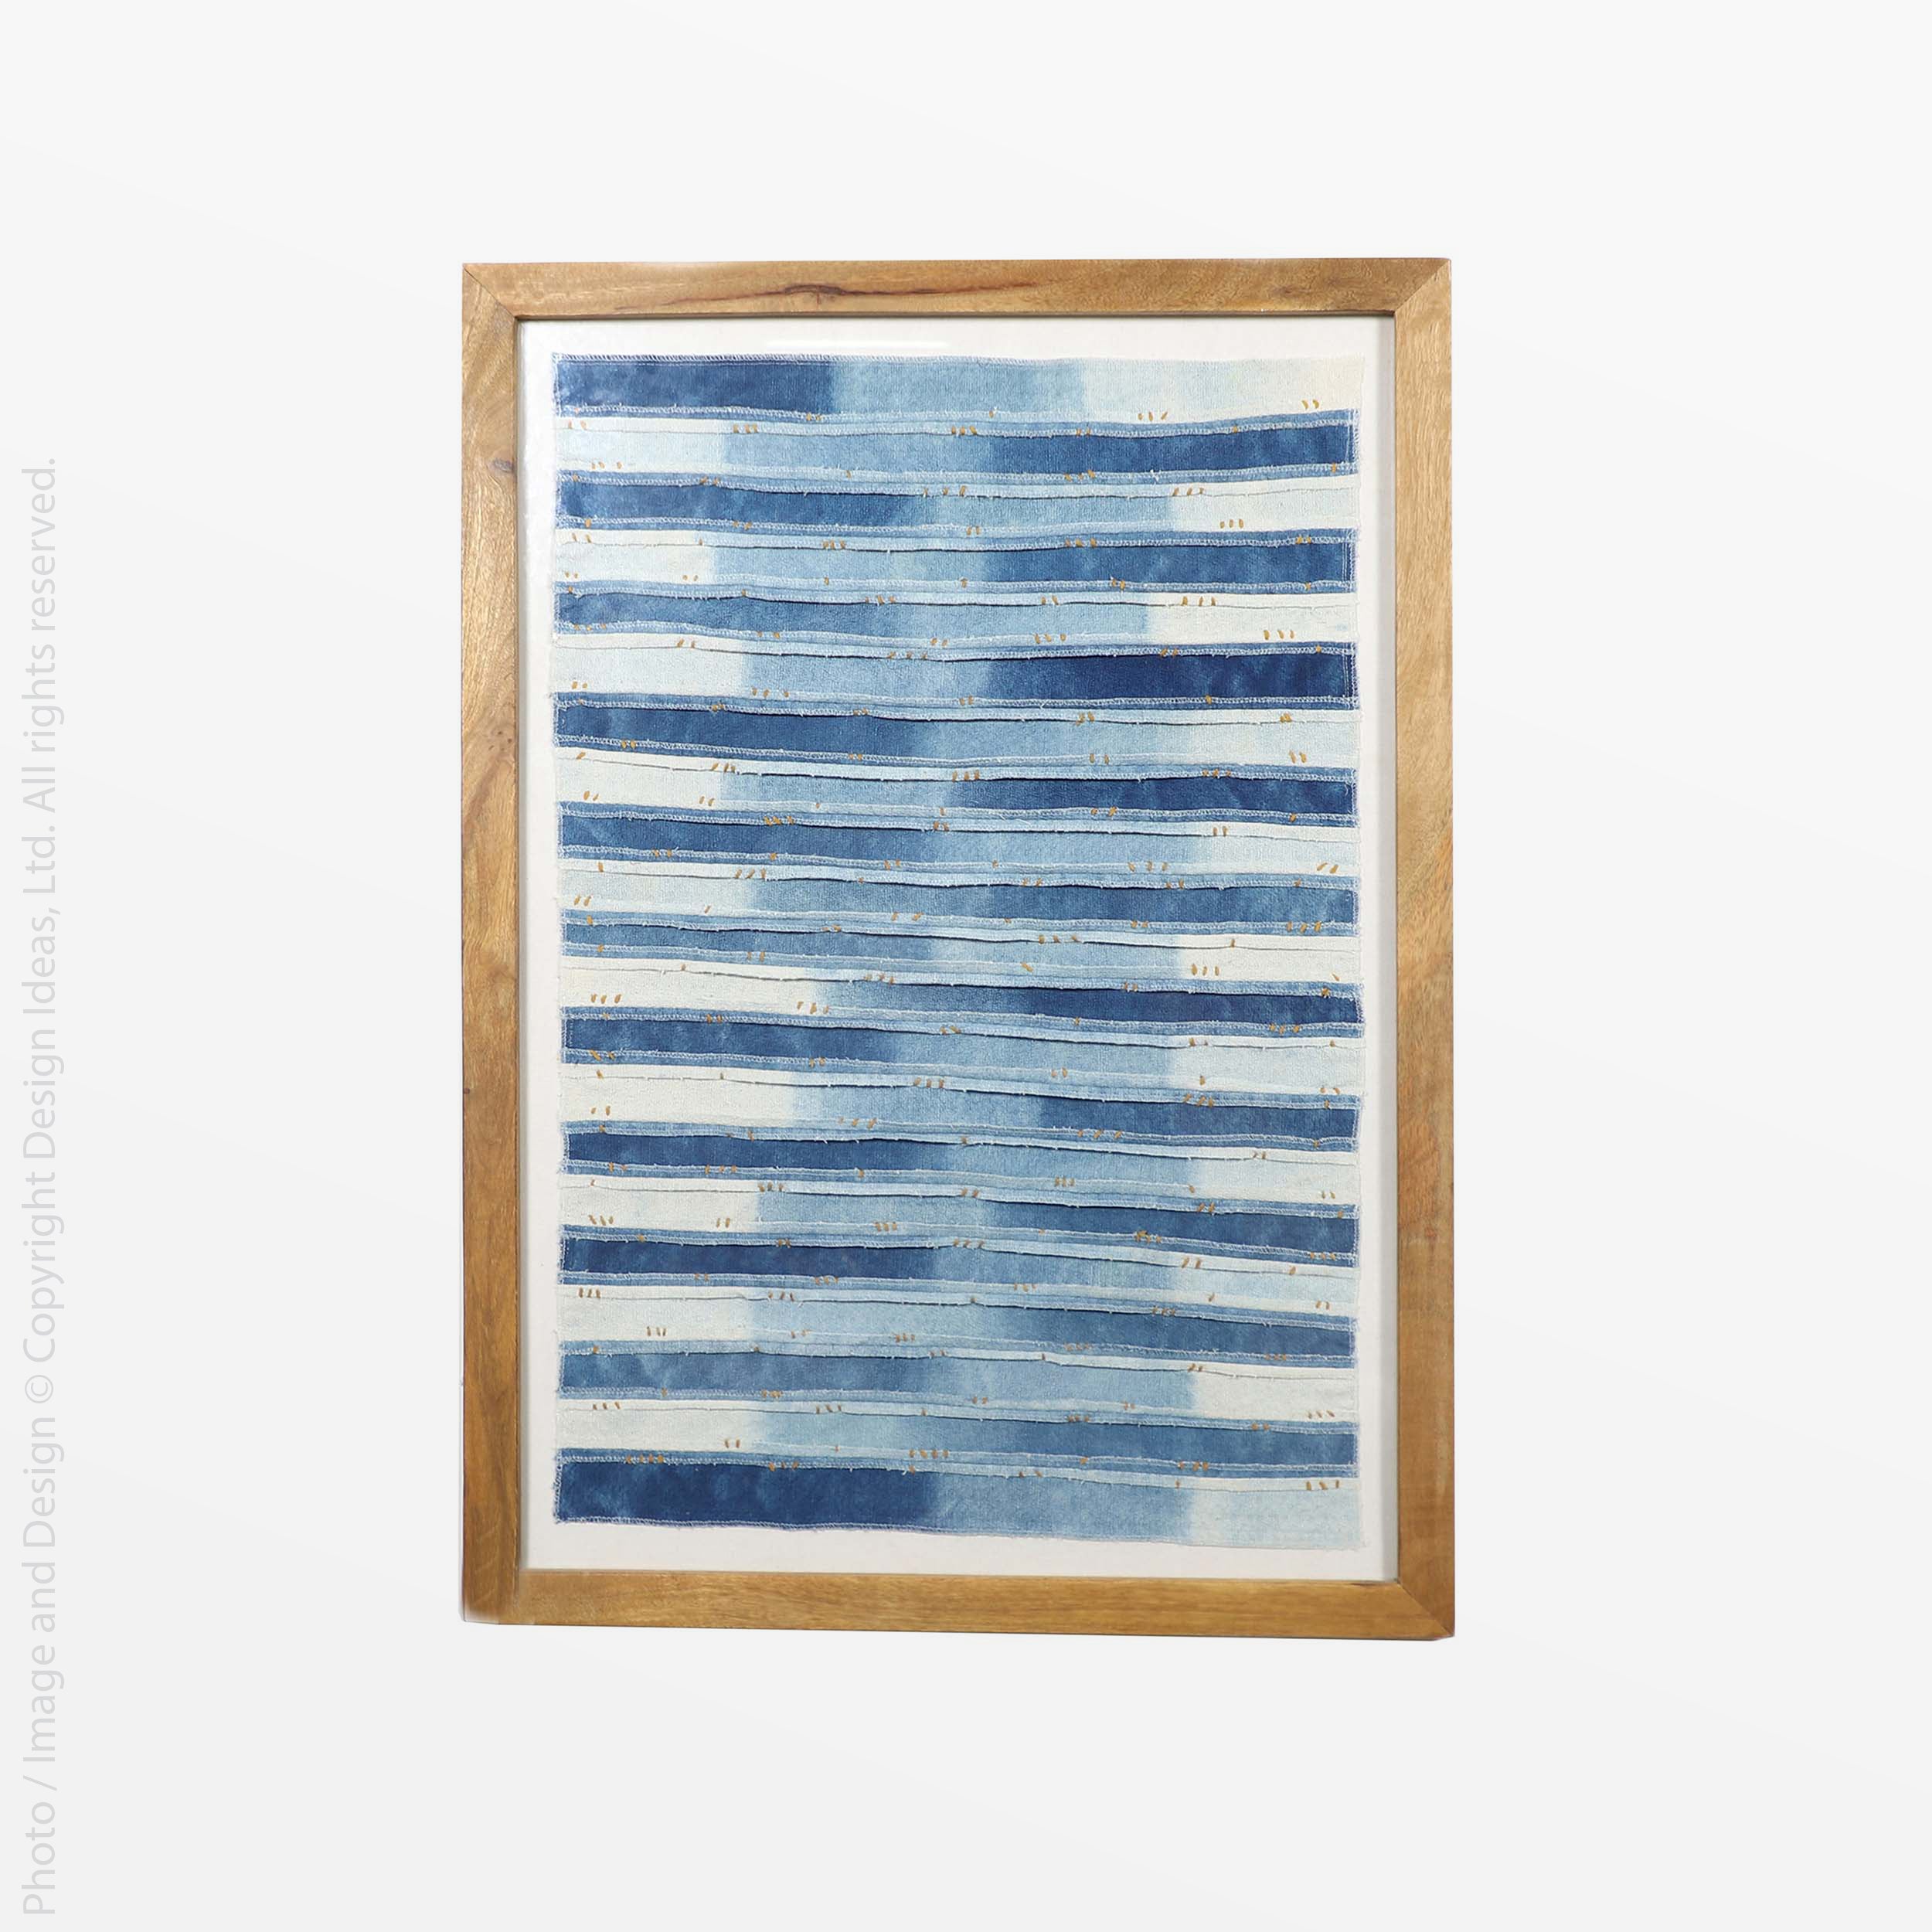 Rano™ wallart - Blue | Image 1 | Premium Wall Art from the Rano collection | made with Fabric for long lasting use | texxture